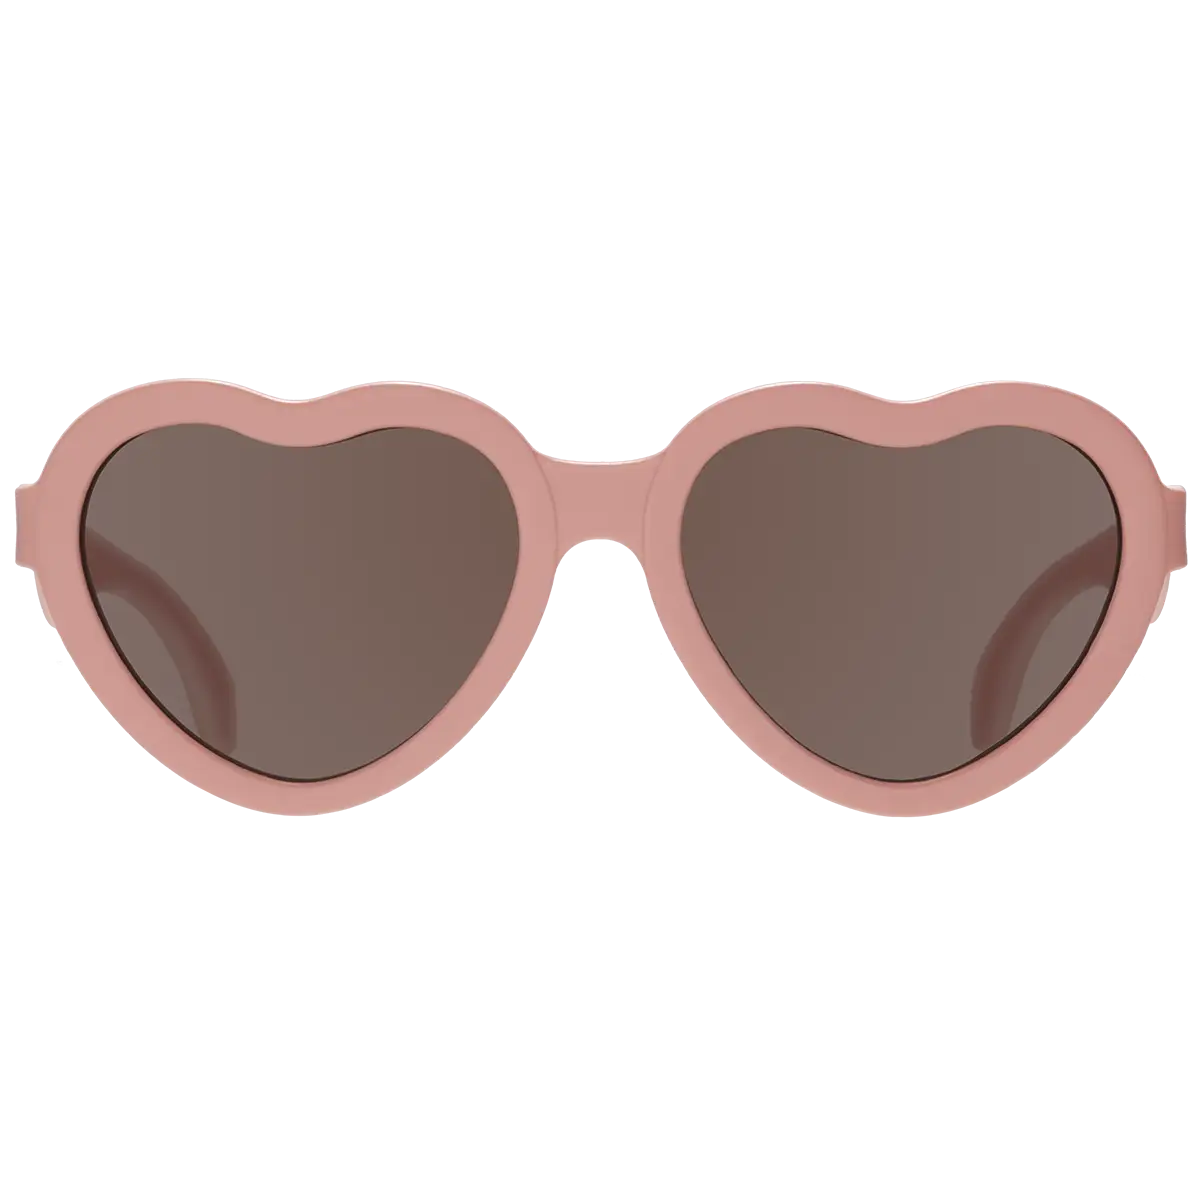 Can't Heartly Wait with Amber Lens - Heart Shaped Sunglasses